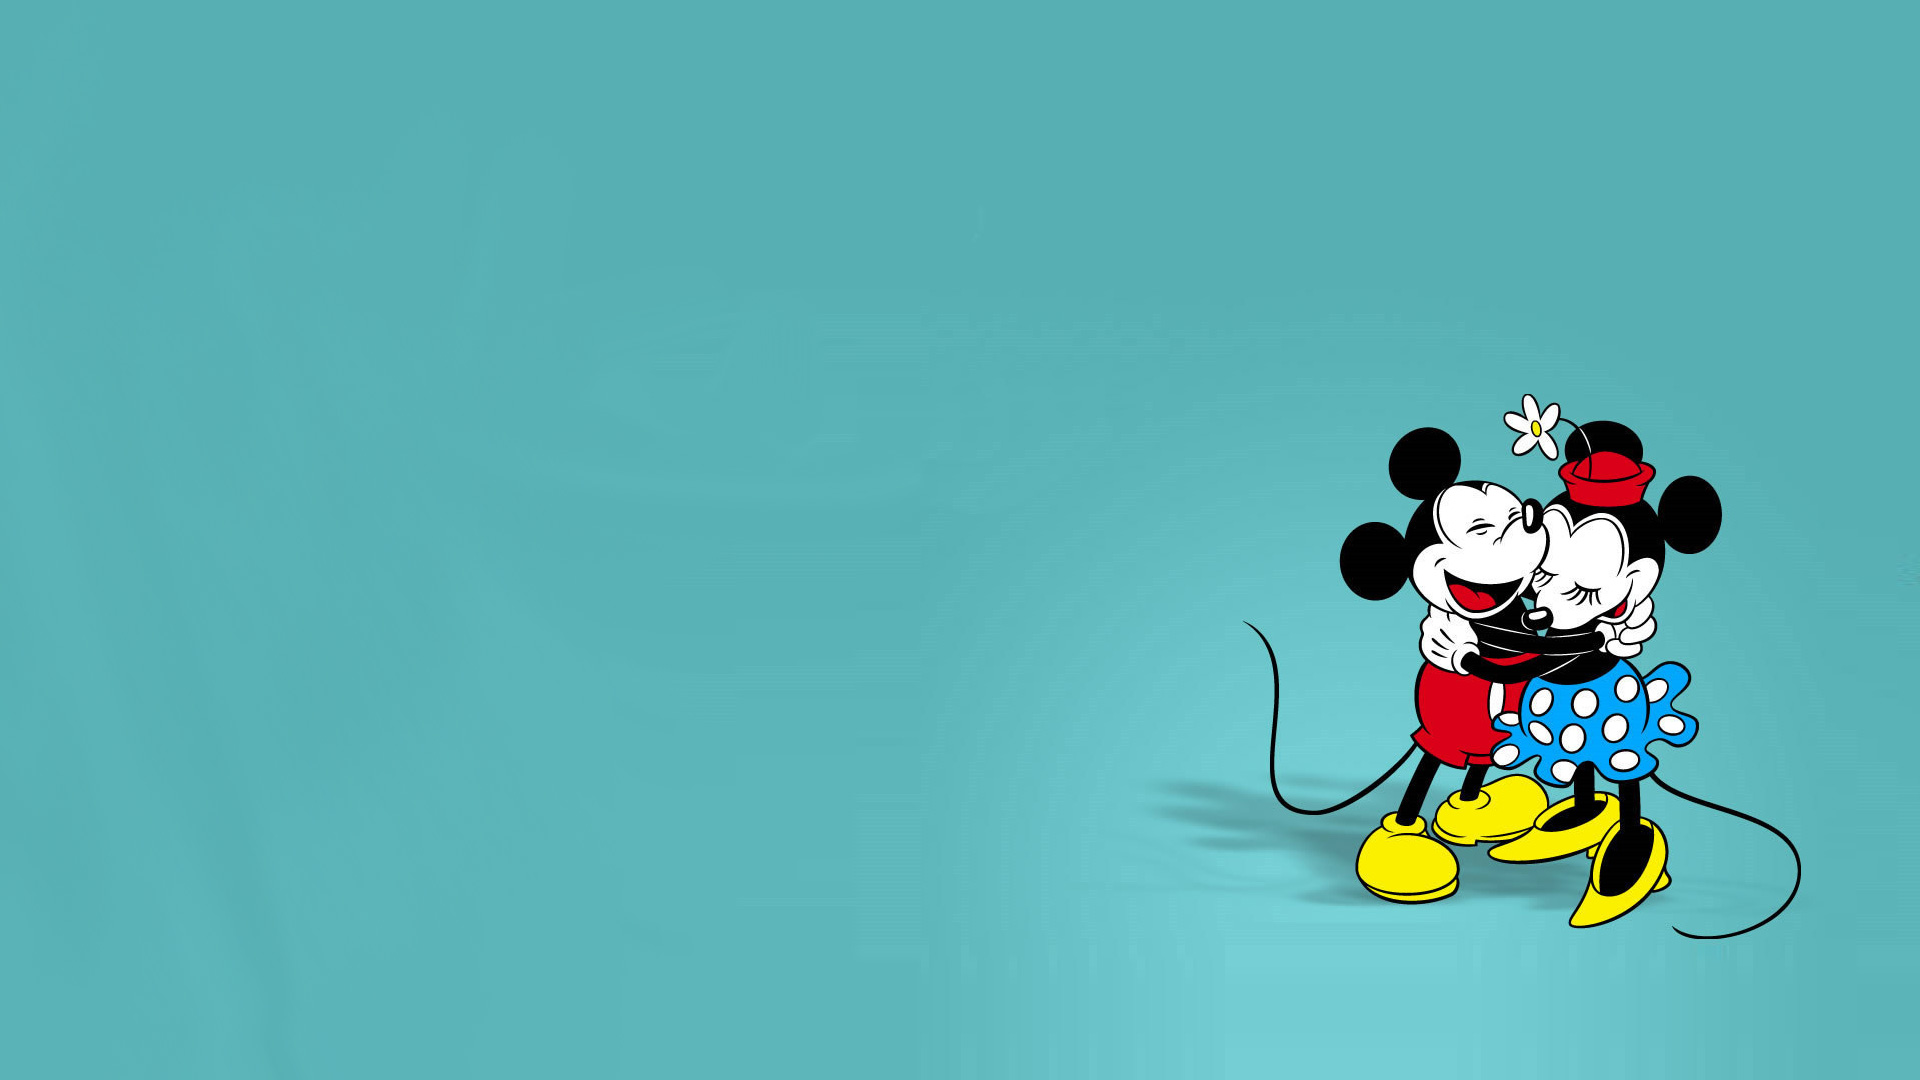  1920 x 1080 Minnie Mouse wallpaper image and choose Set as Background